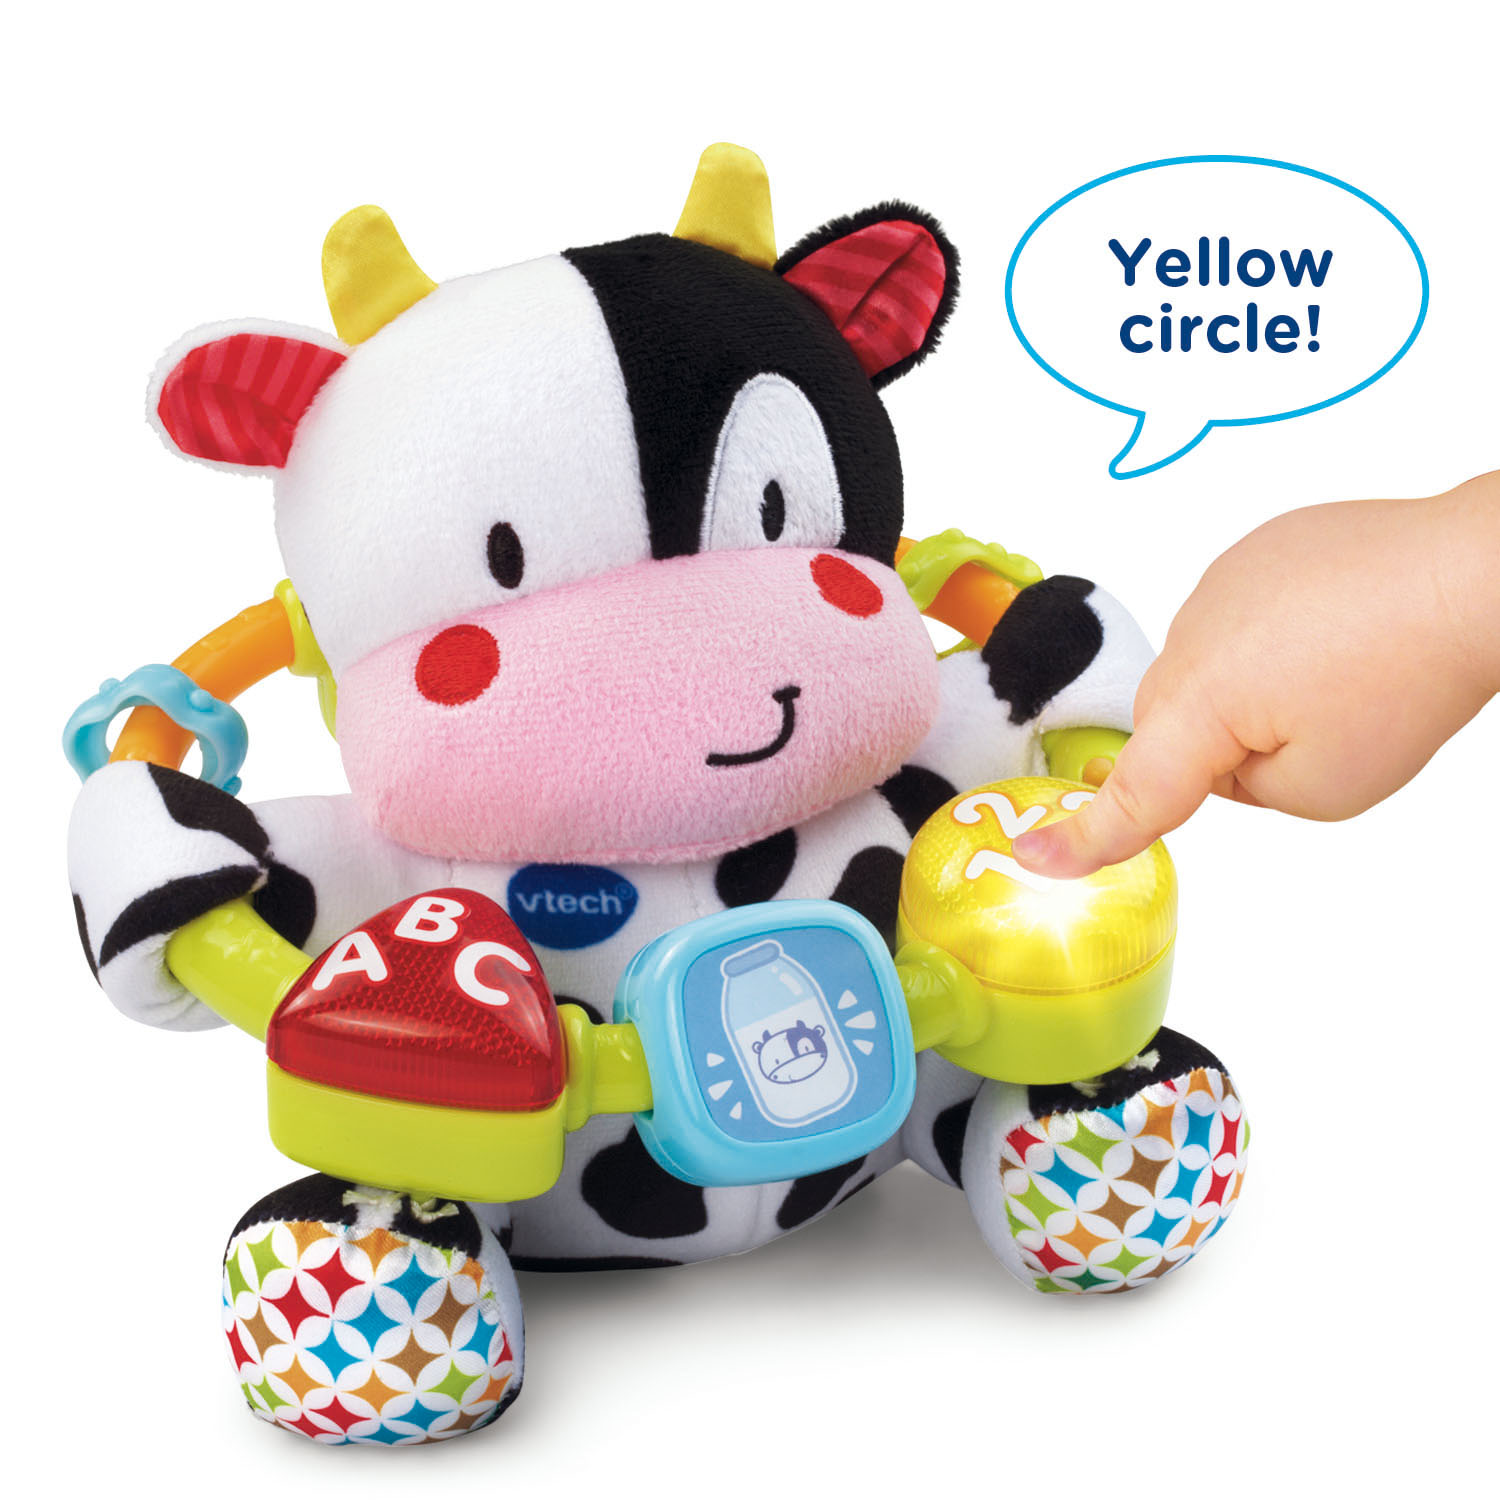 VTech Lil' Critters Moosical Beads, Plush Cow, Musical Baby Toy - image 2 of 7